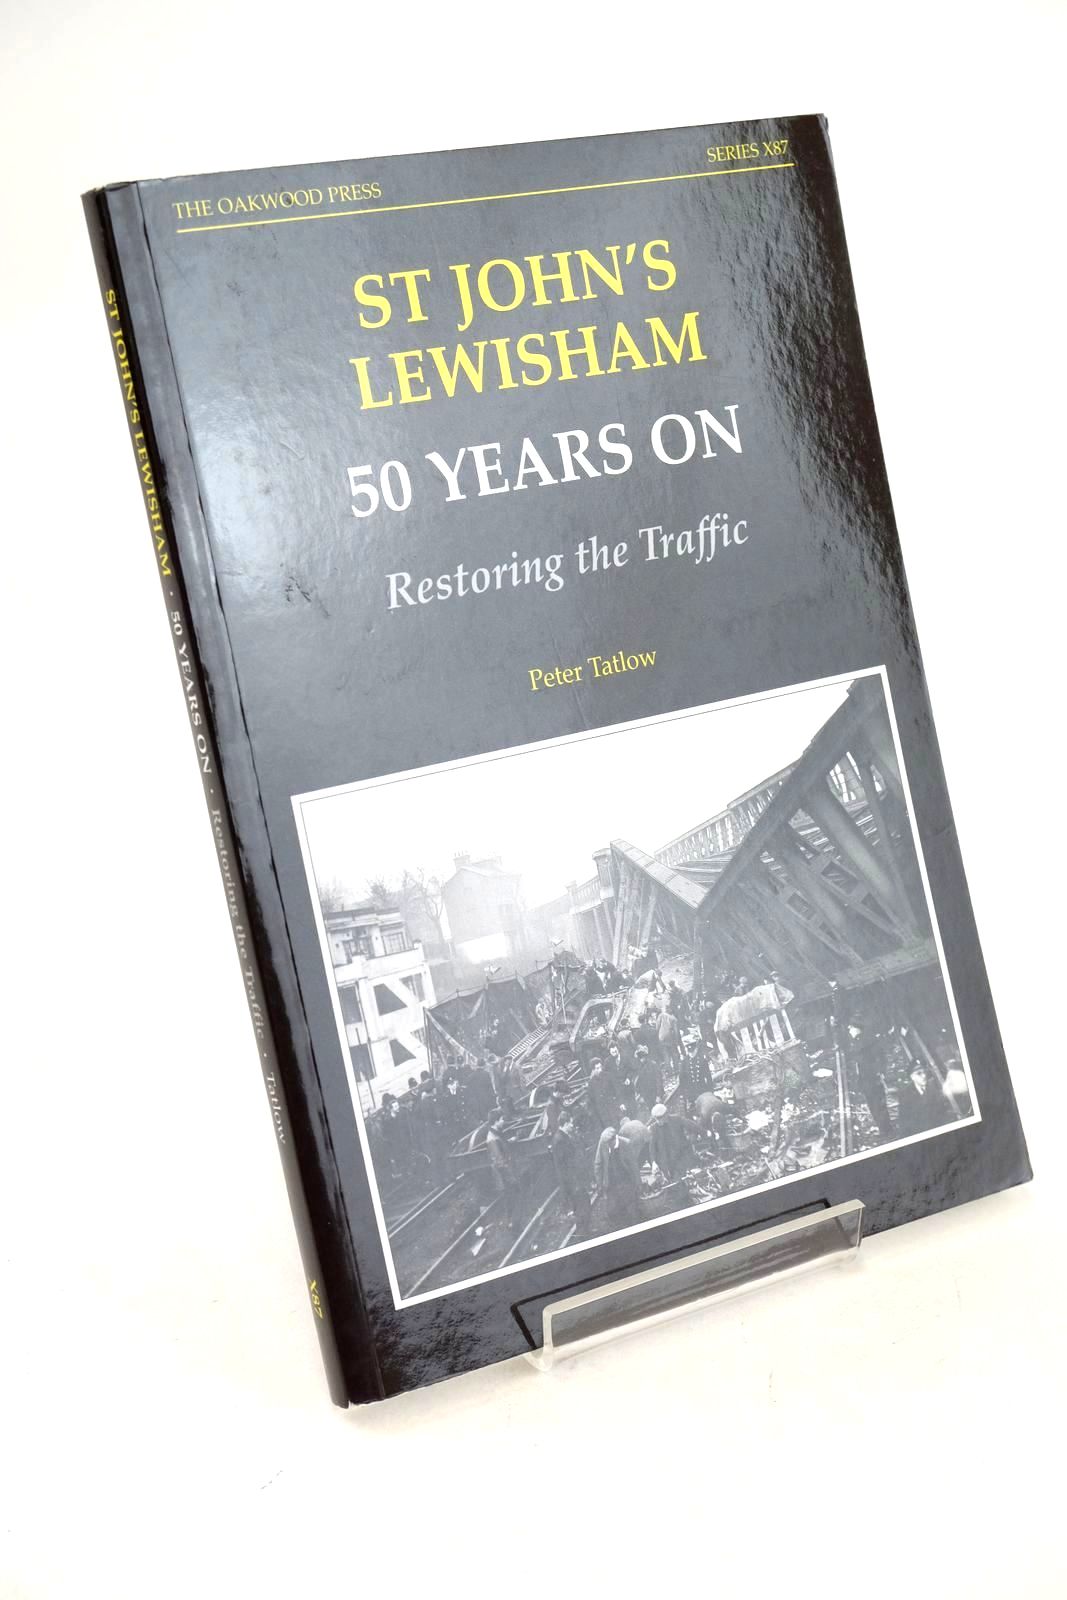 Photo of ST JOHN'S LEWISHAM 50 YEARS ON: RESTORING TRAFFIC written by Tatlow, Peter published by The Oakwood Press (STOCK CODE: 1327103)  for sale by Stella & Rose's Books